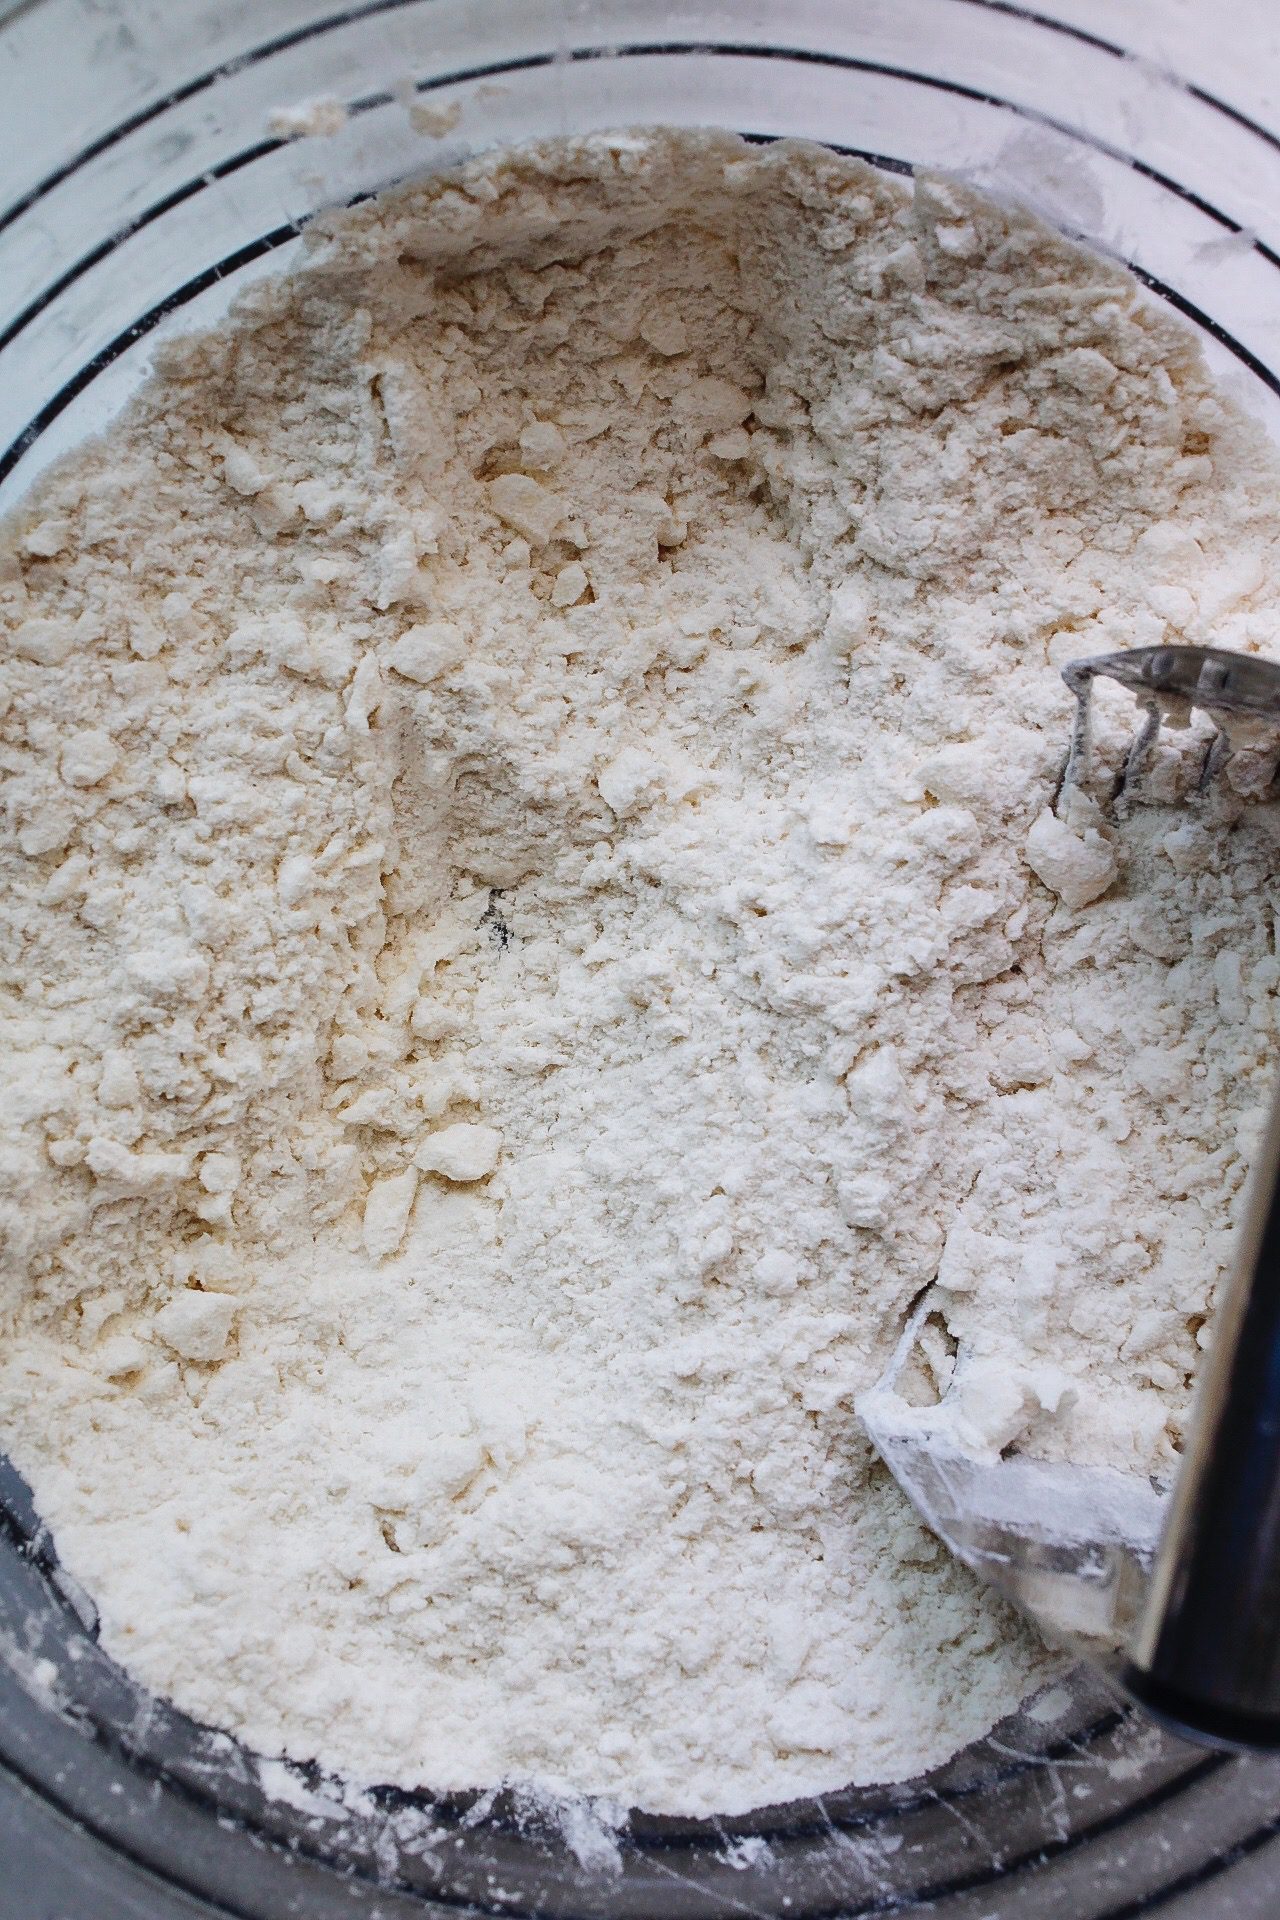 scone dough with pea-sized lumps